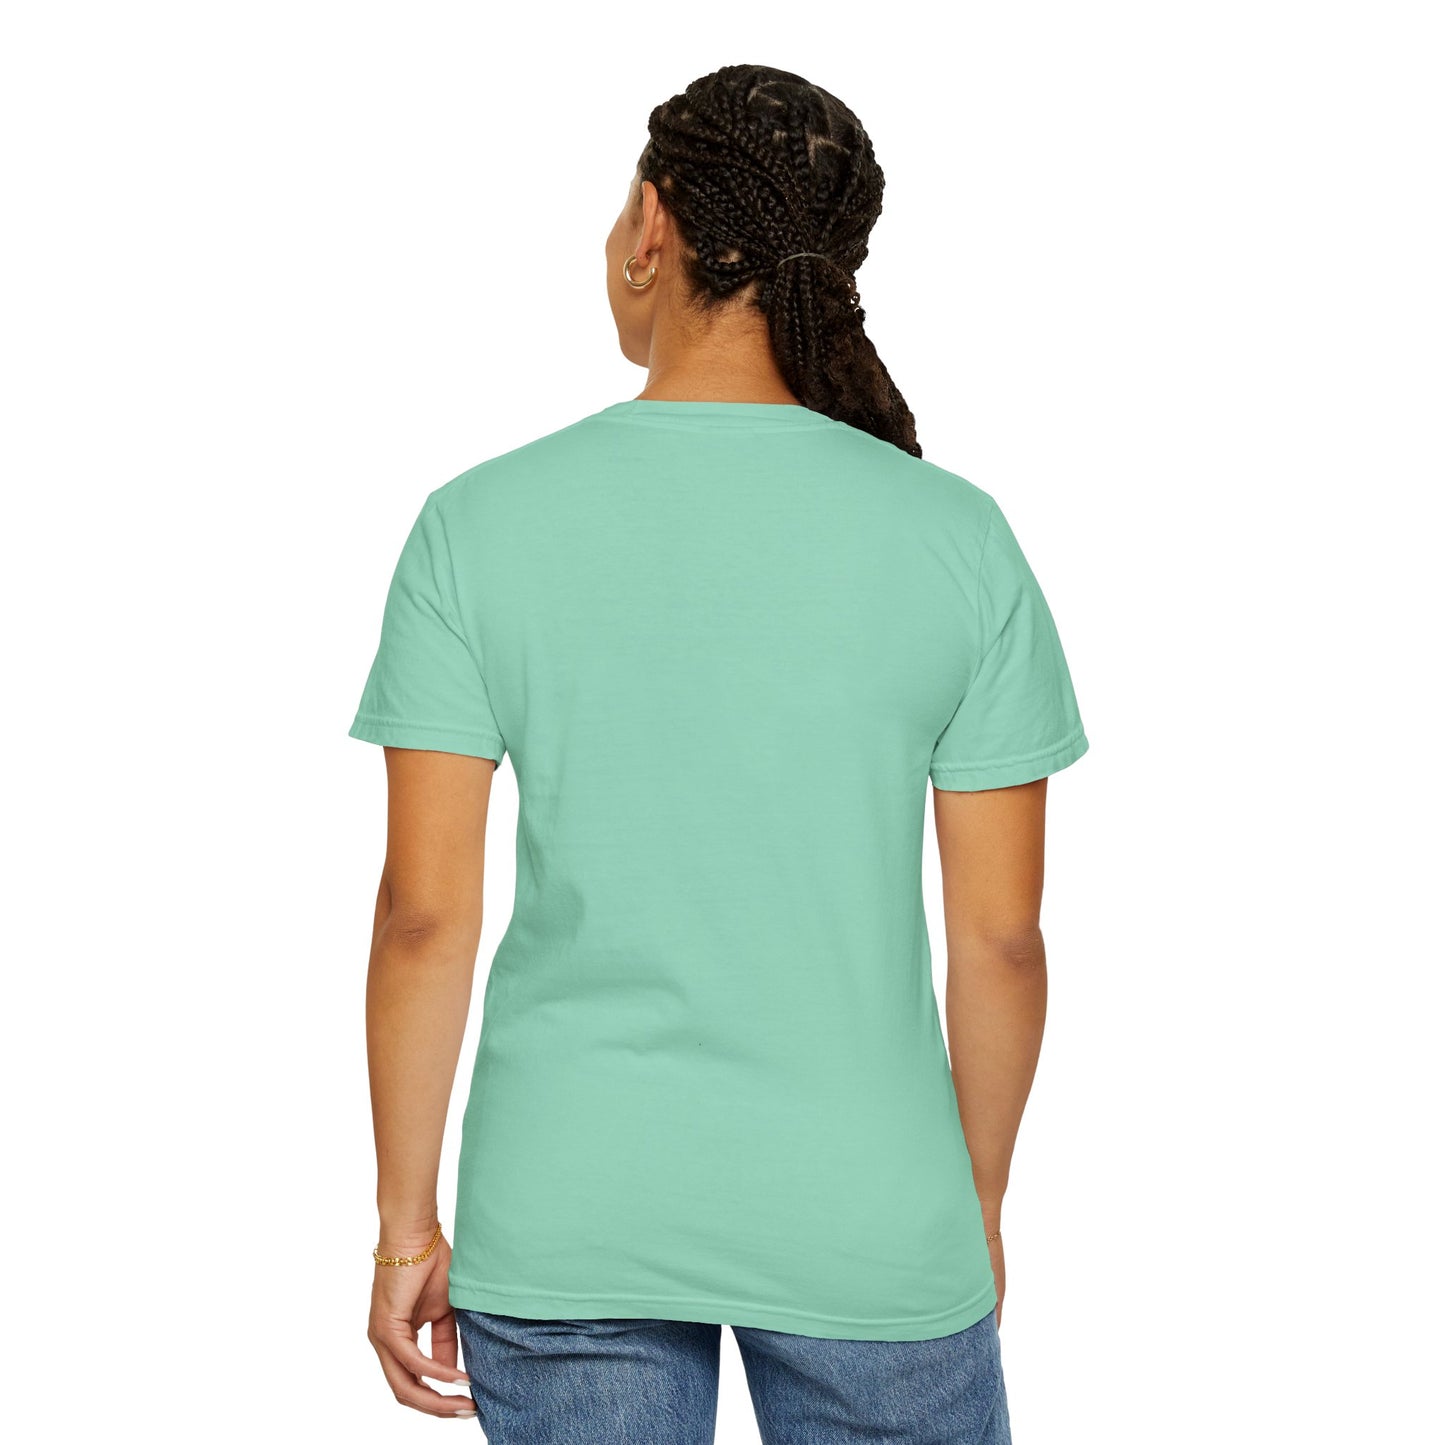 Lack of planning on your part - Unisex Garment-Dyed T-shirt